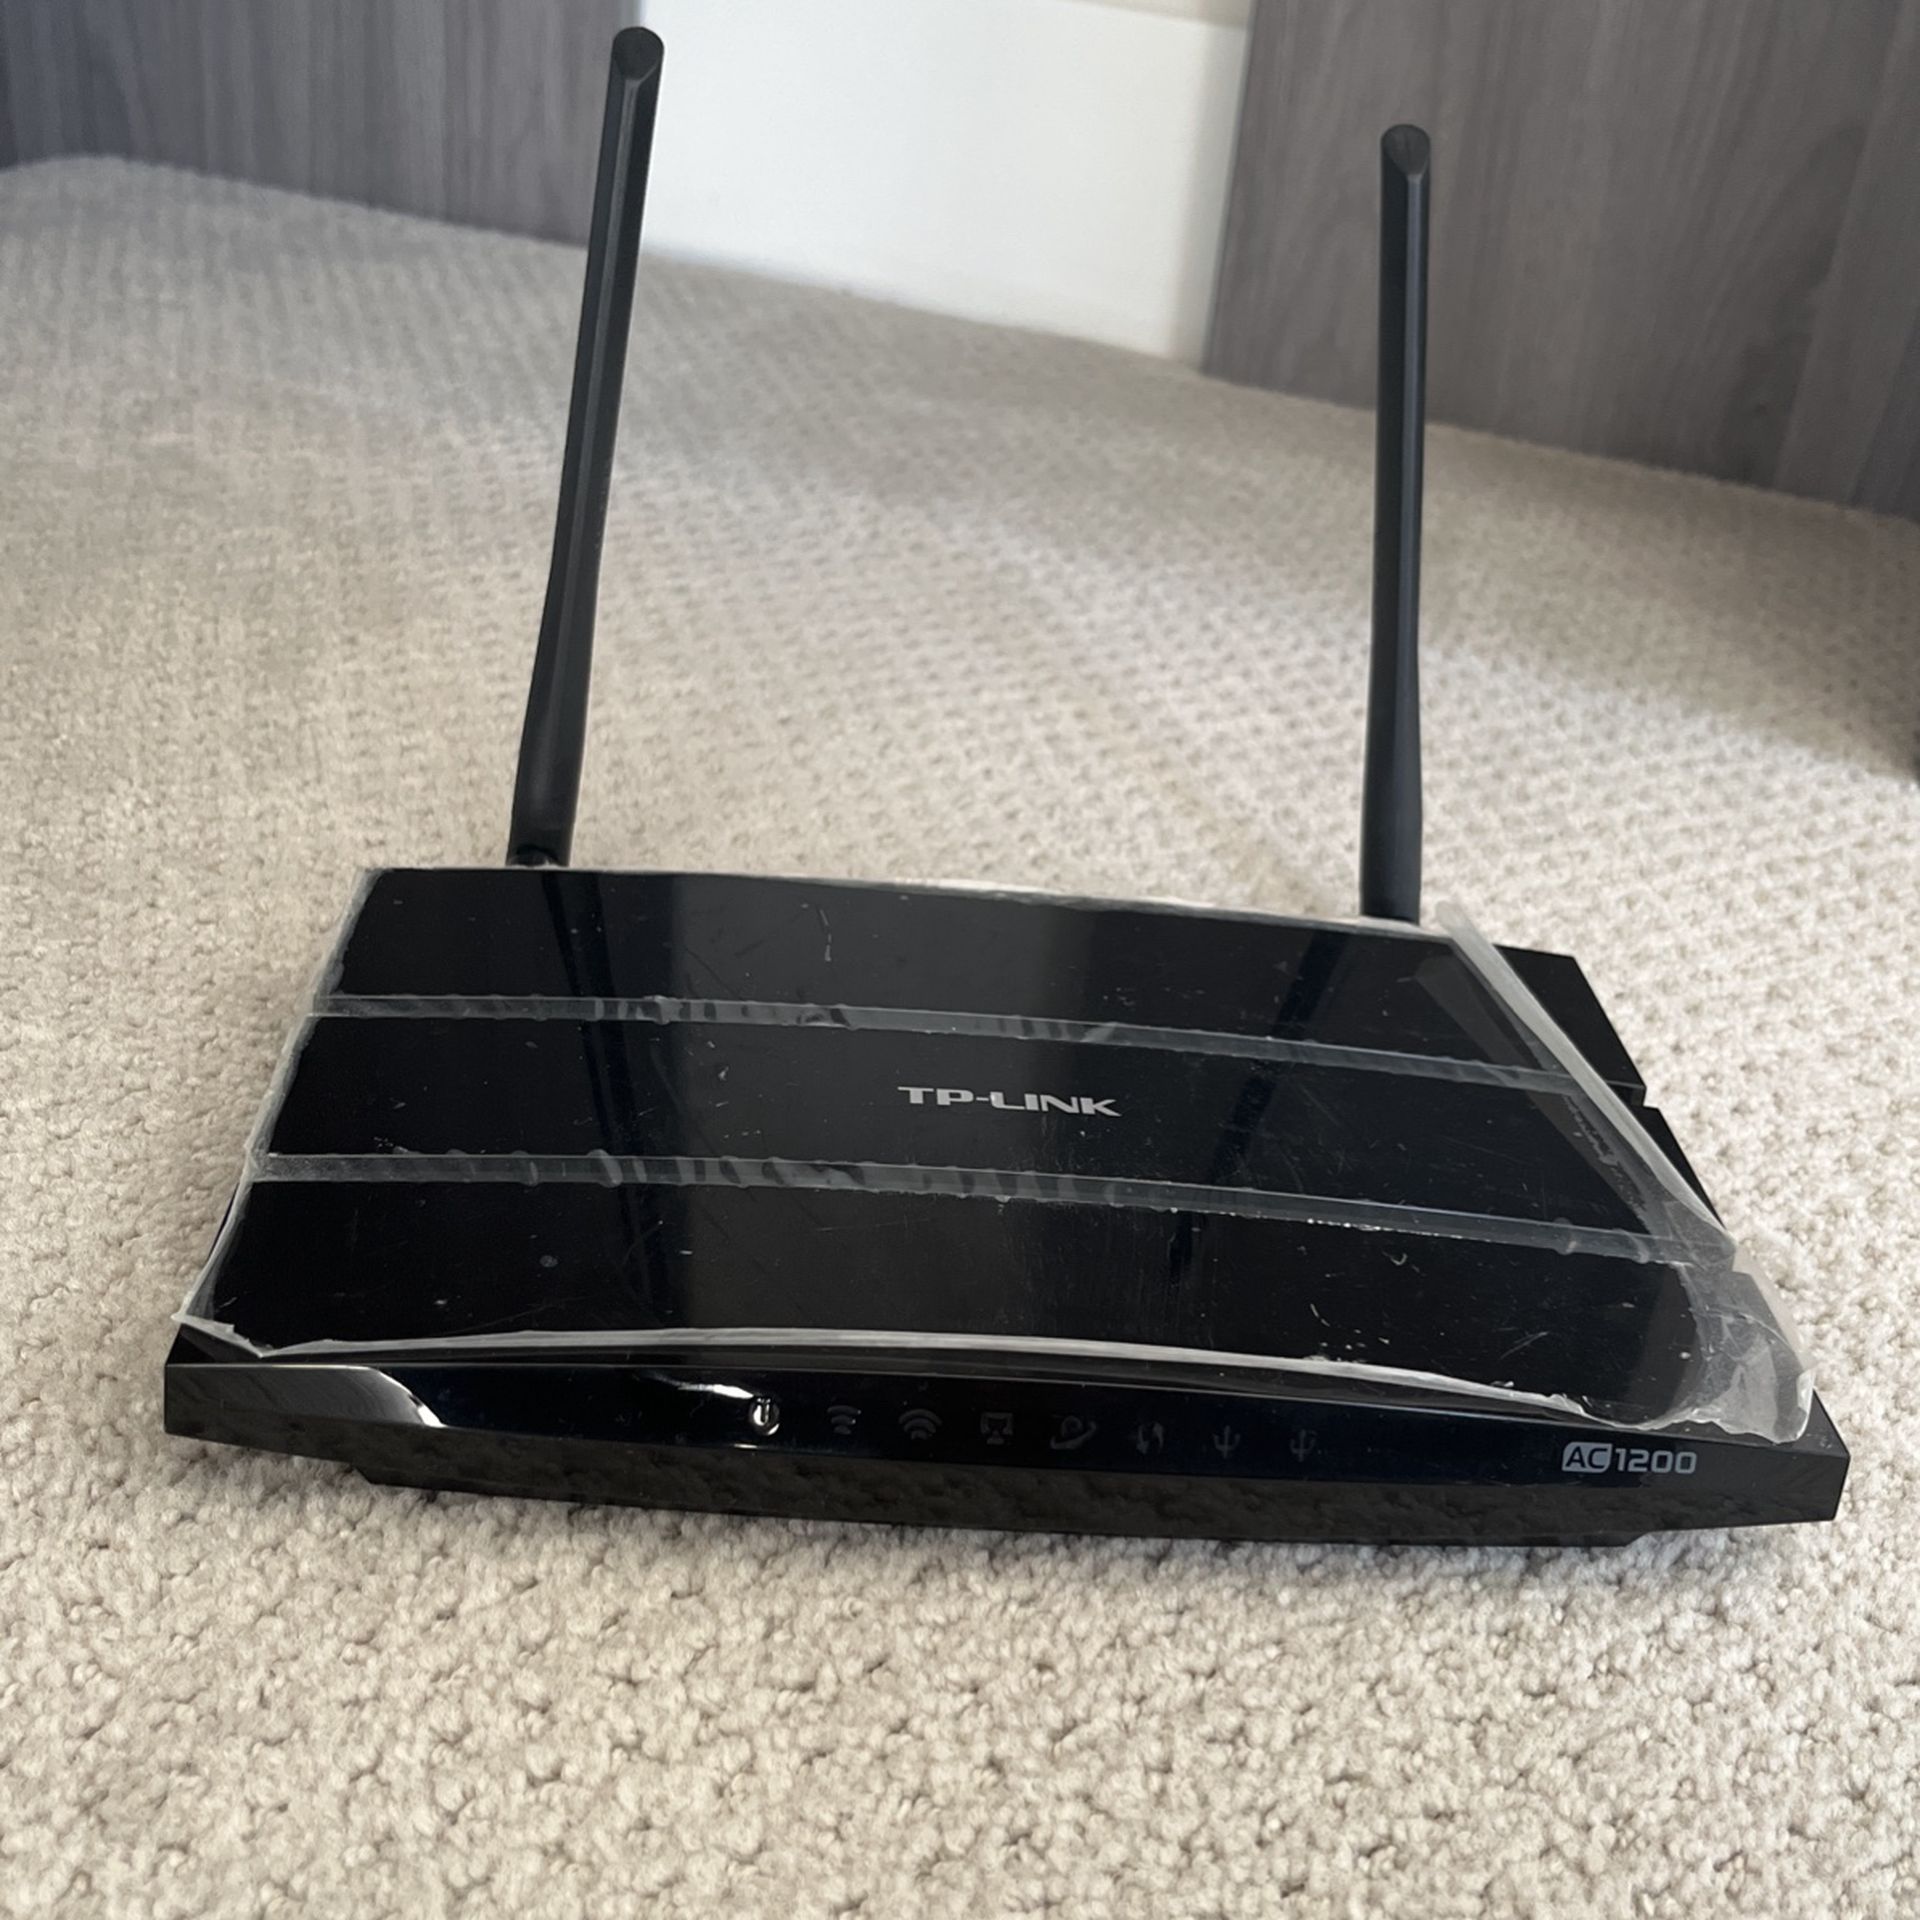 TP-LINK AC1200 Dual Band Router